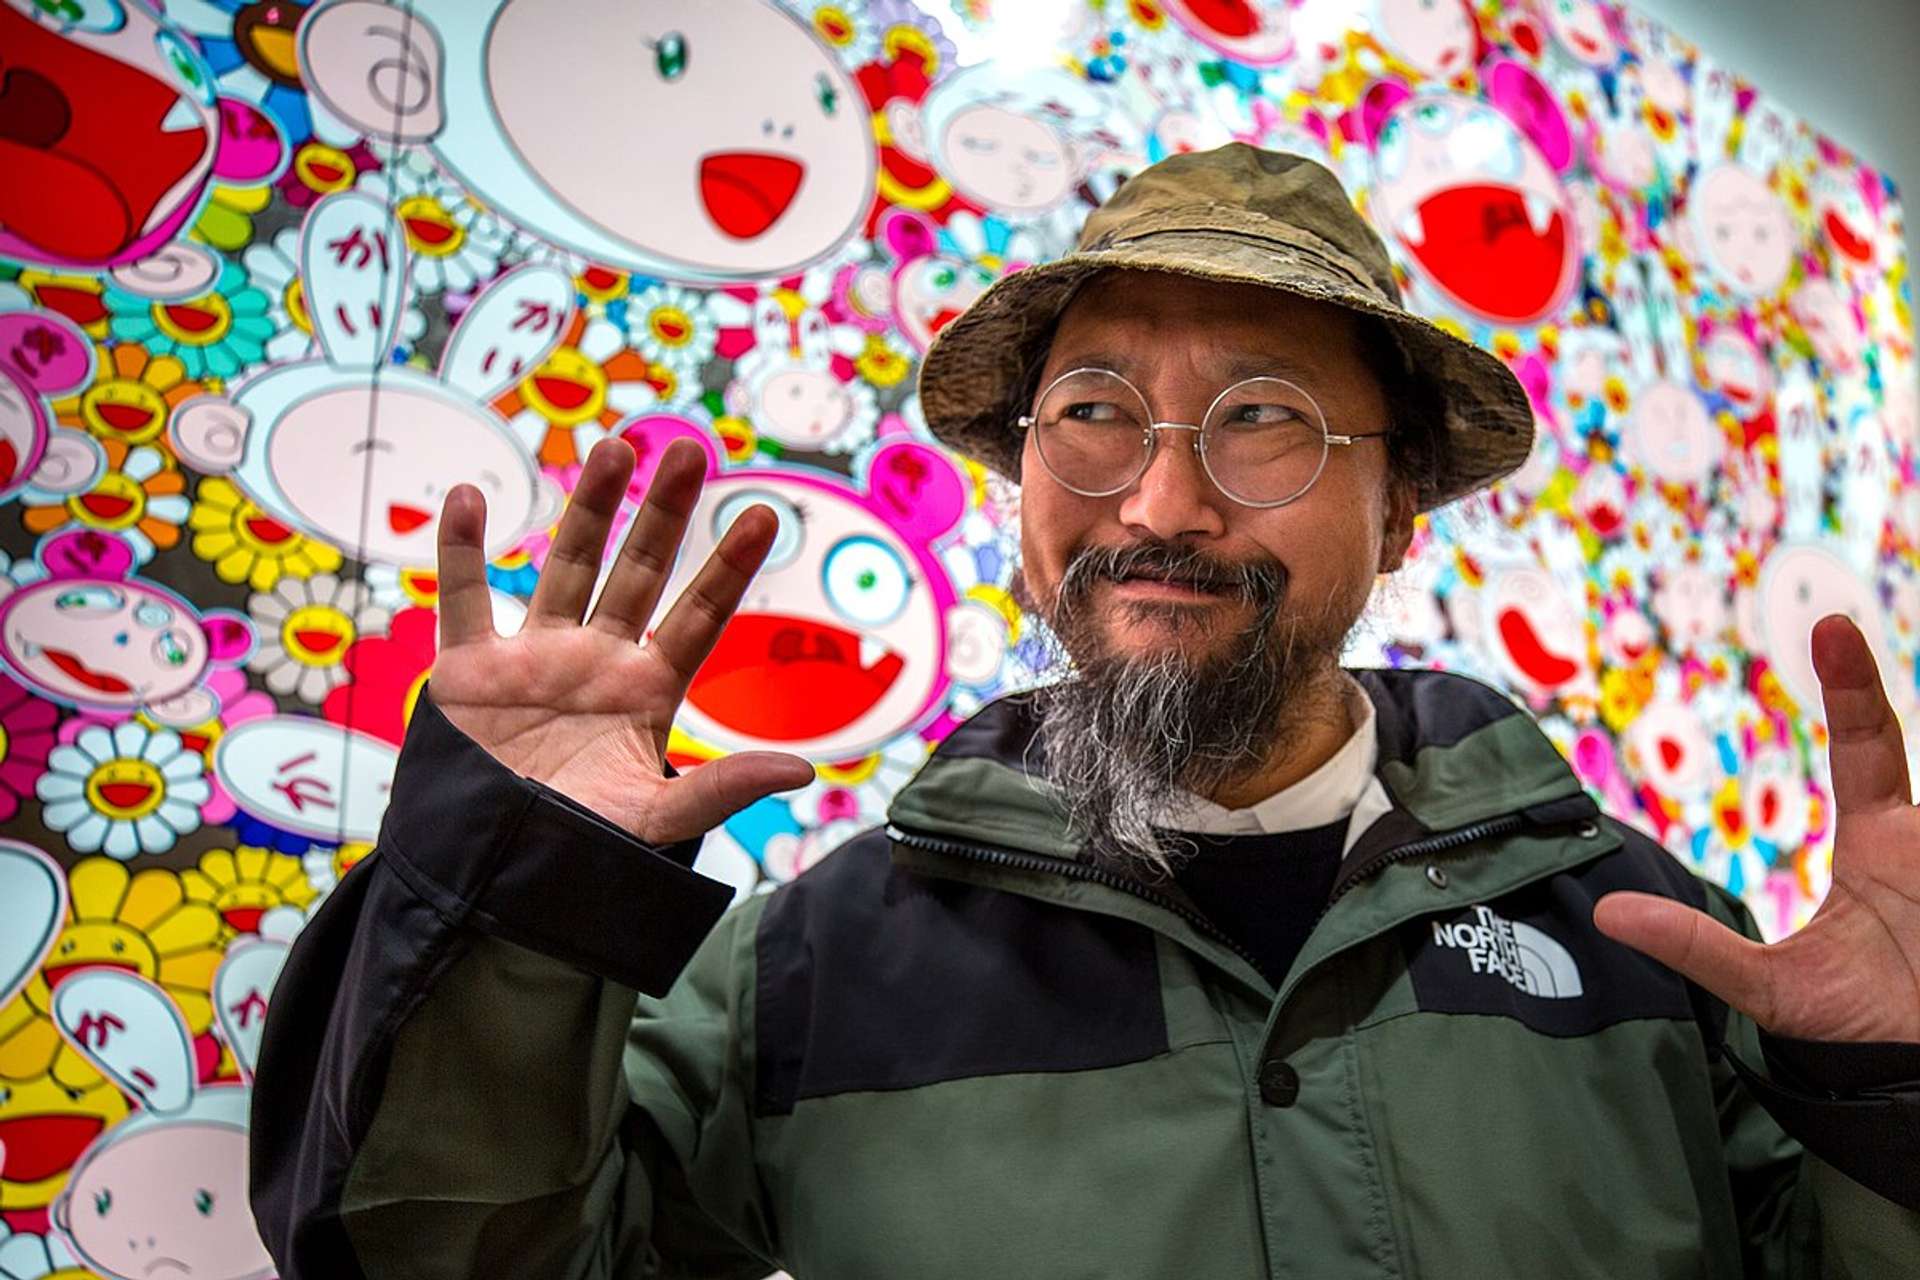 Takashi Murakami stood in front of one of his artworks at The Museum of Fine Arts in Boston.